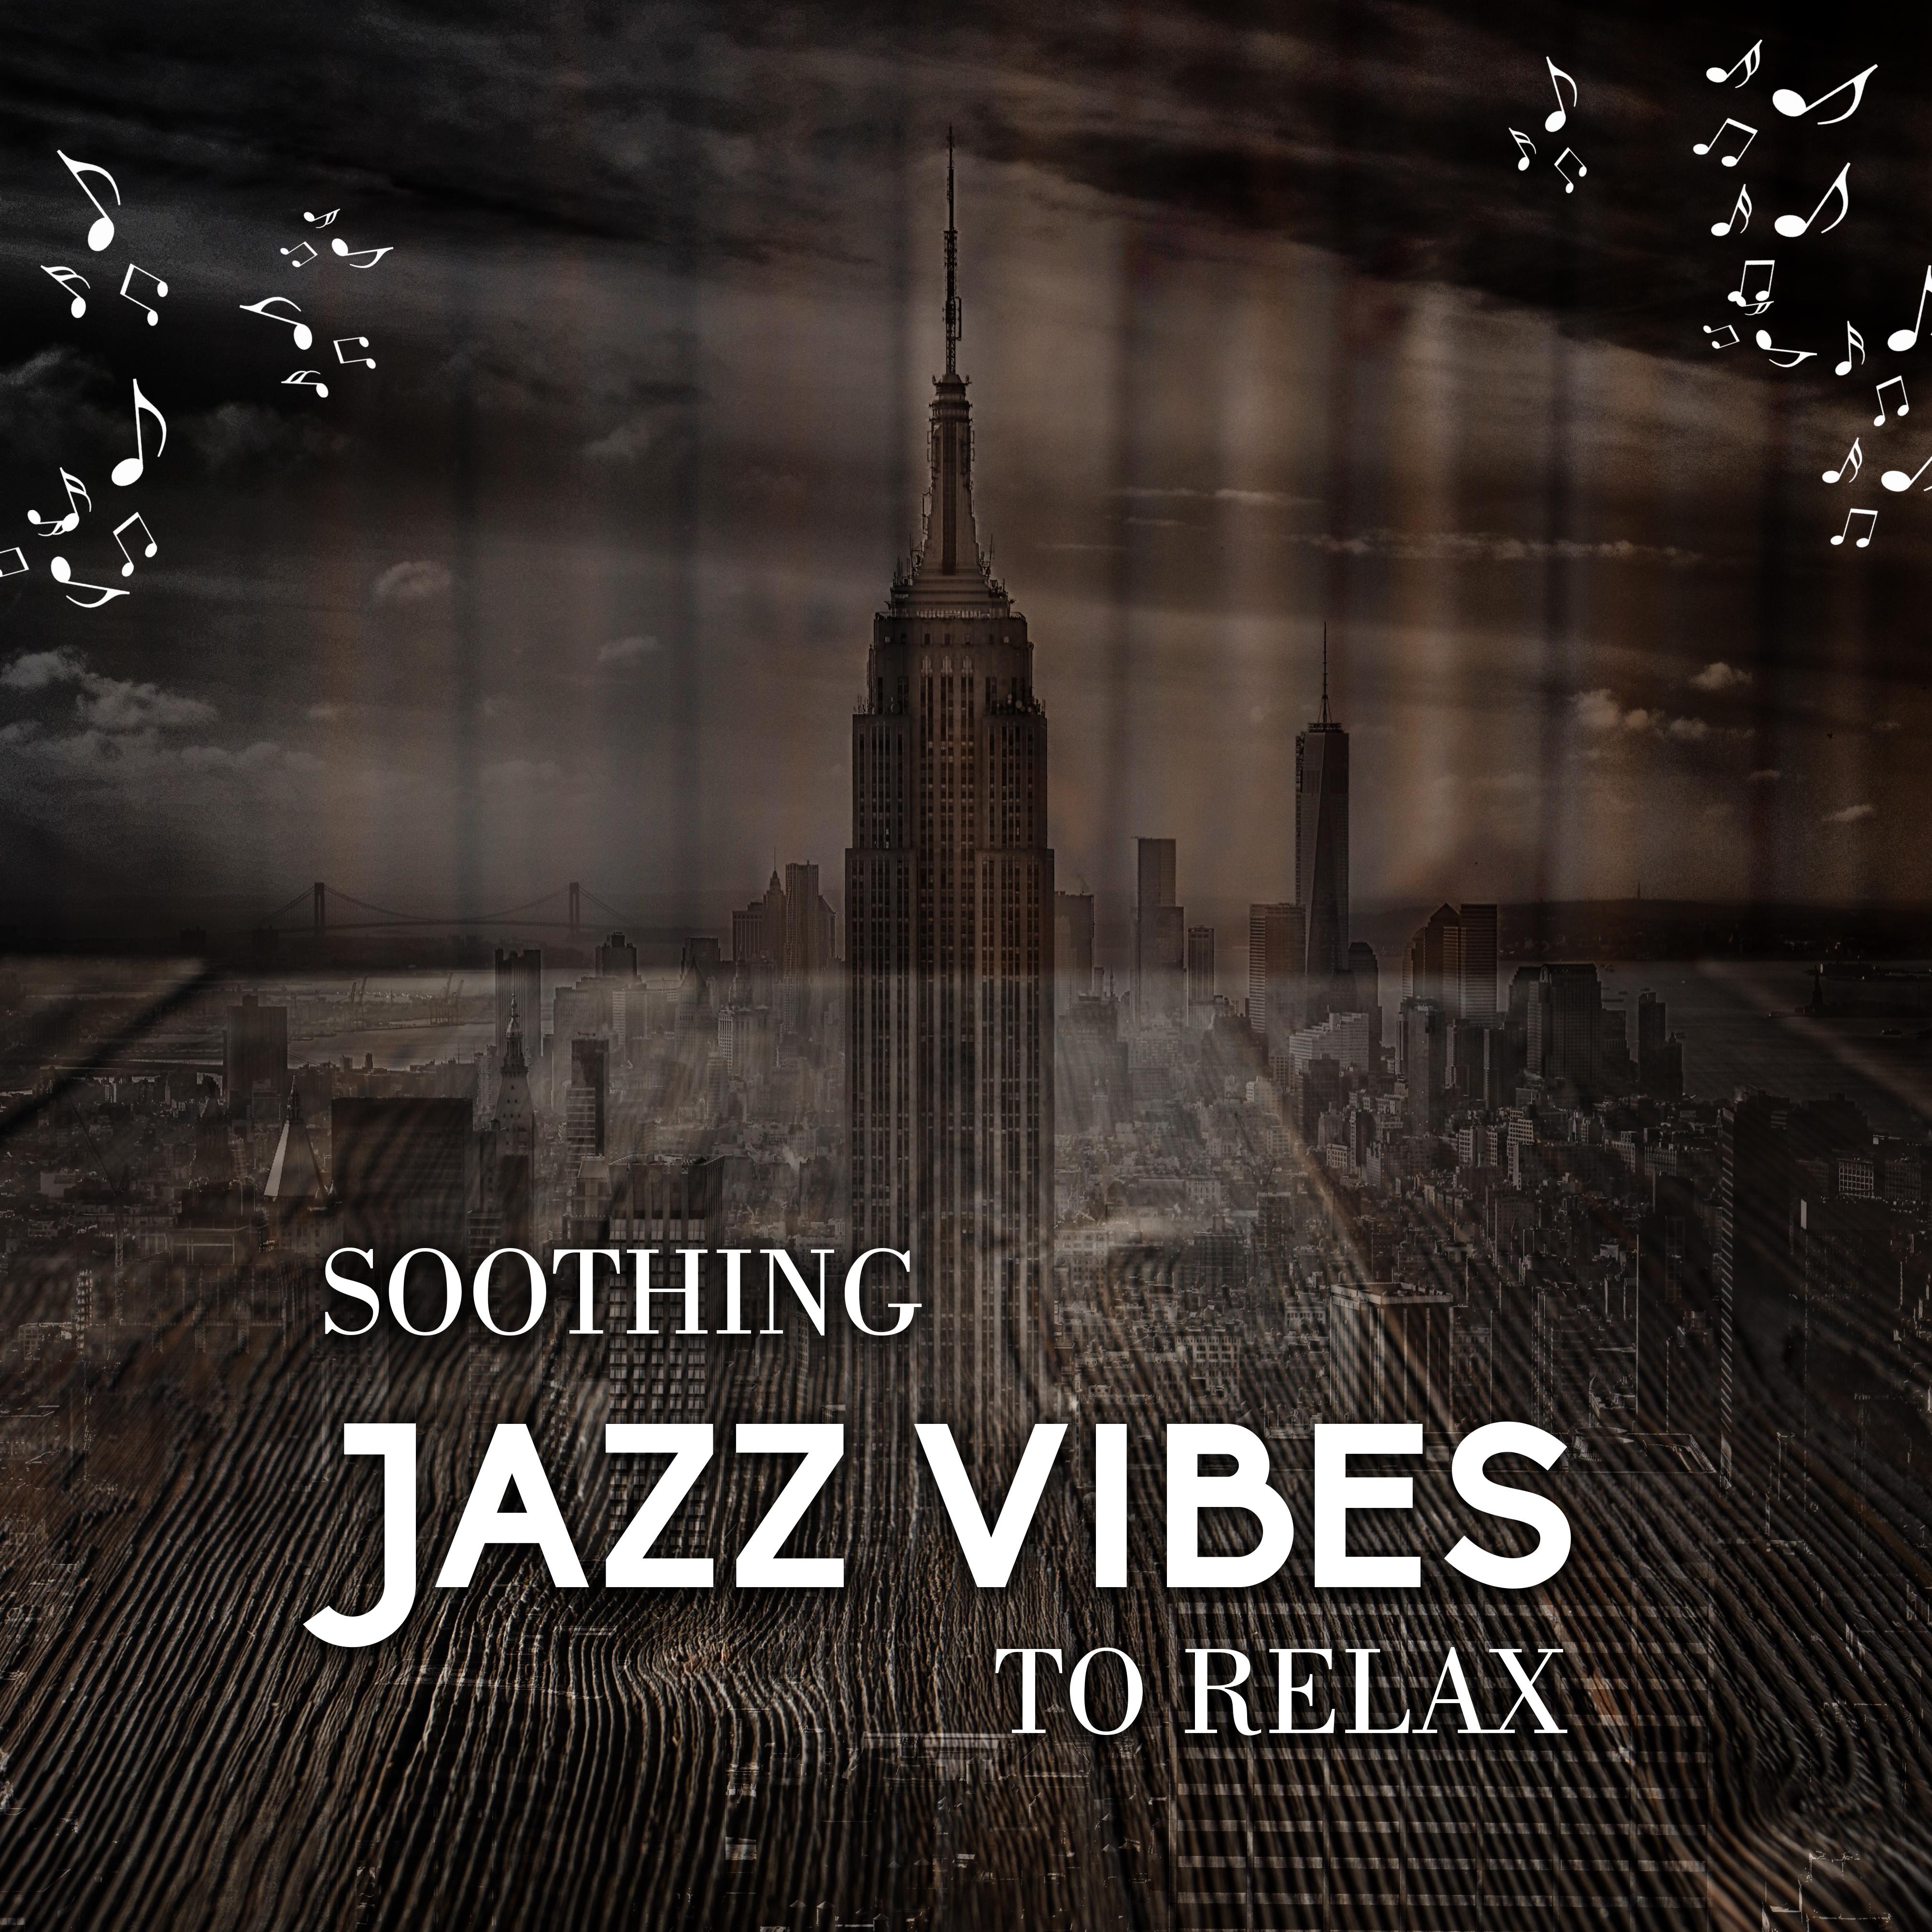 Soothing Jazz Vibes to Relax